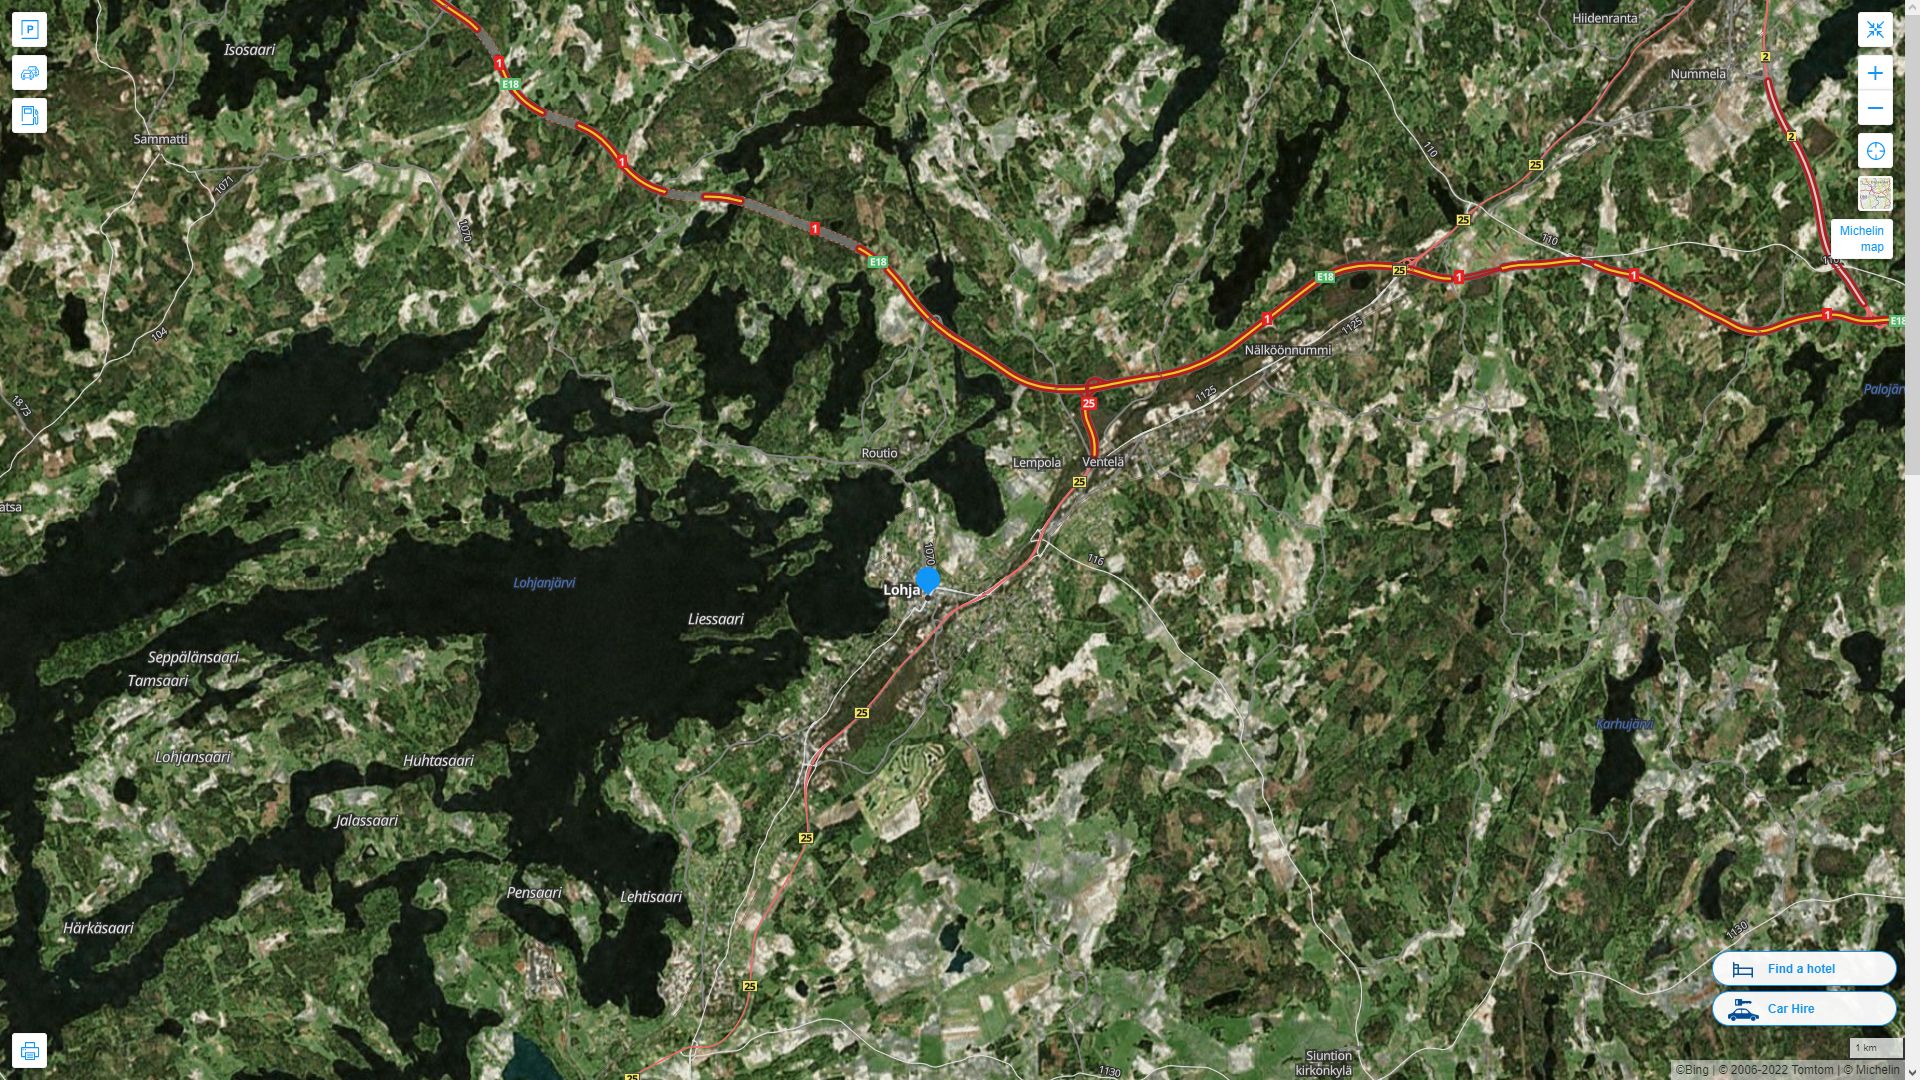 Lohja Highway and Road Map with Satellite View